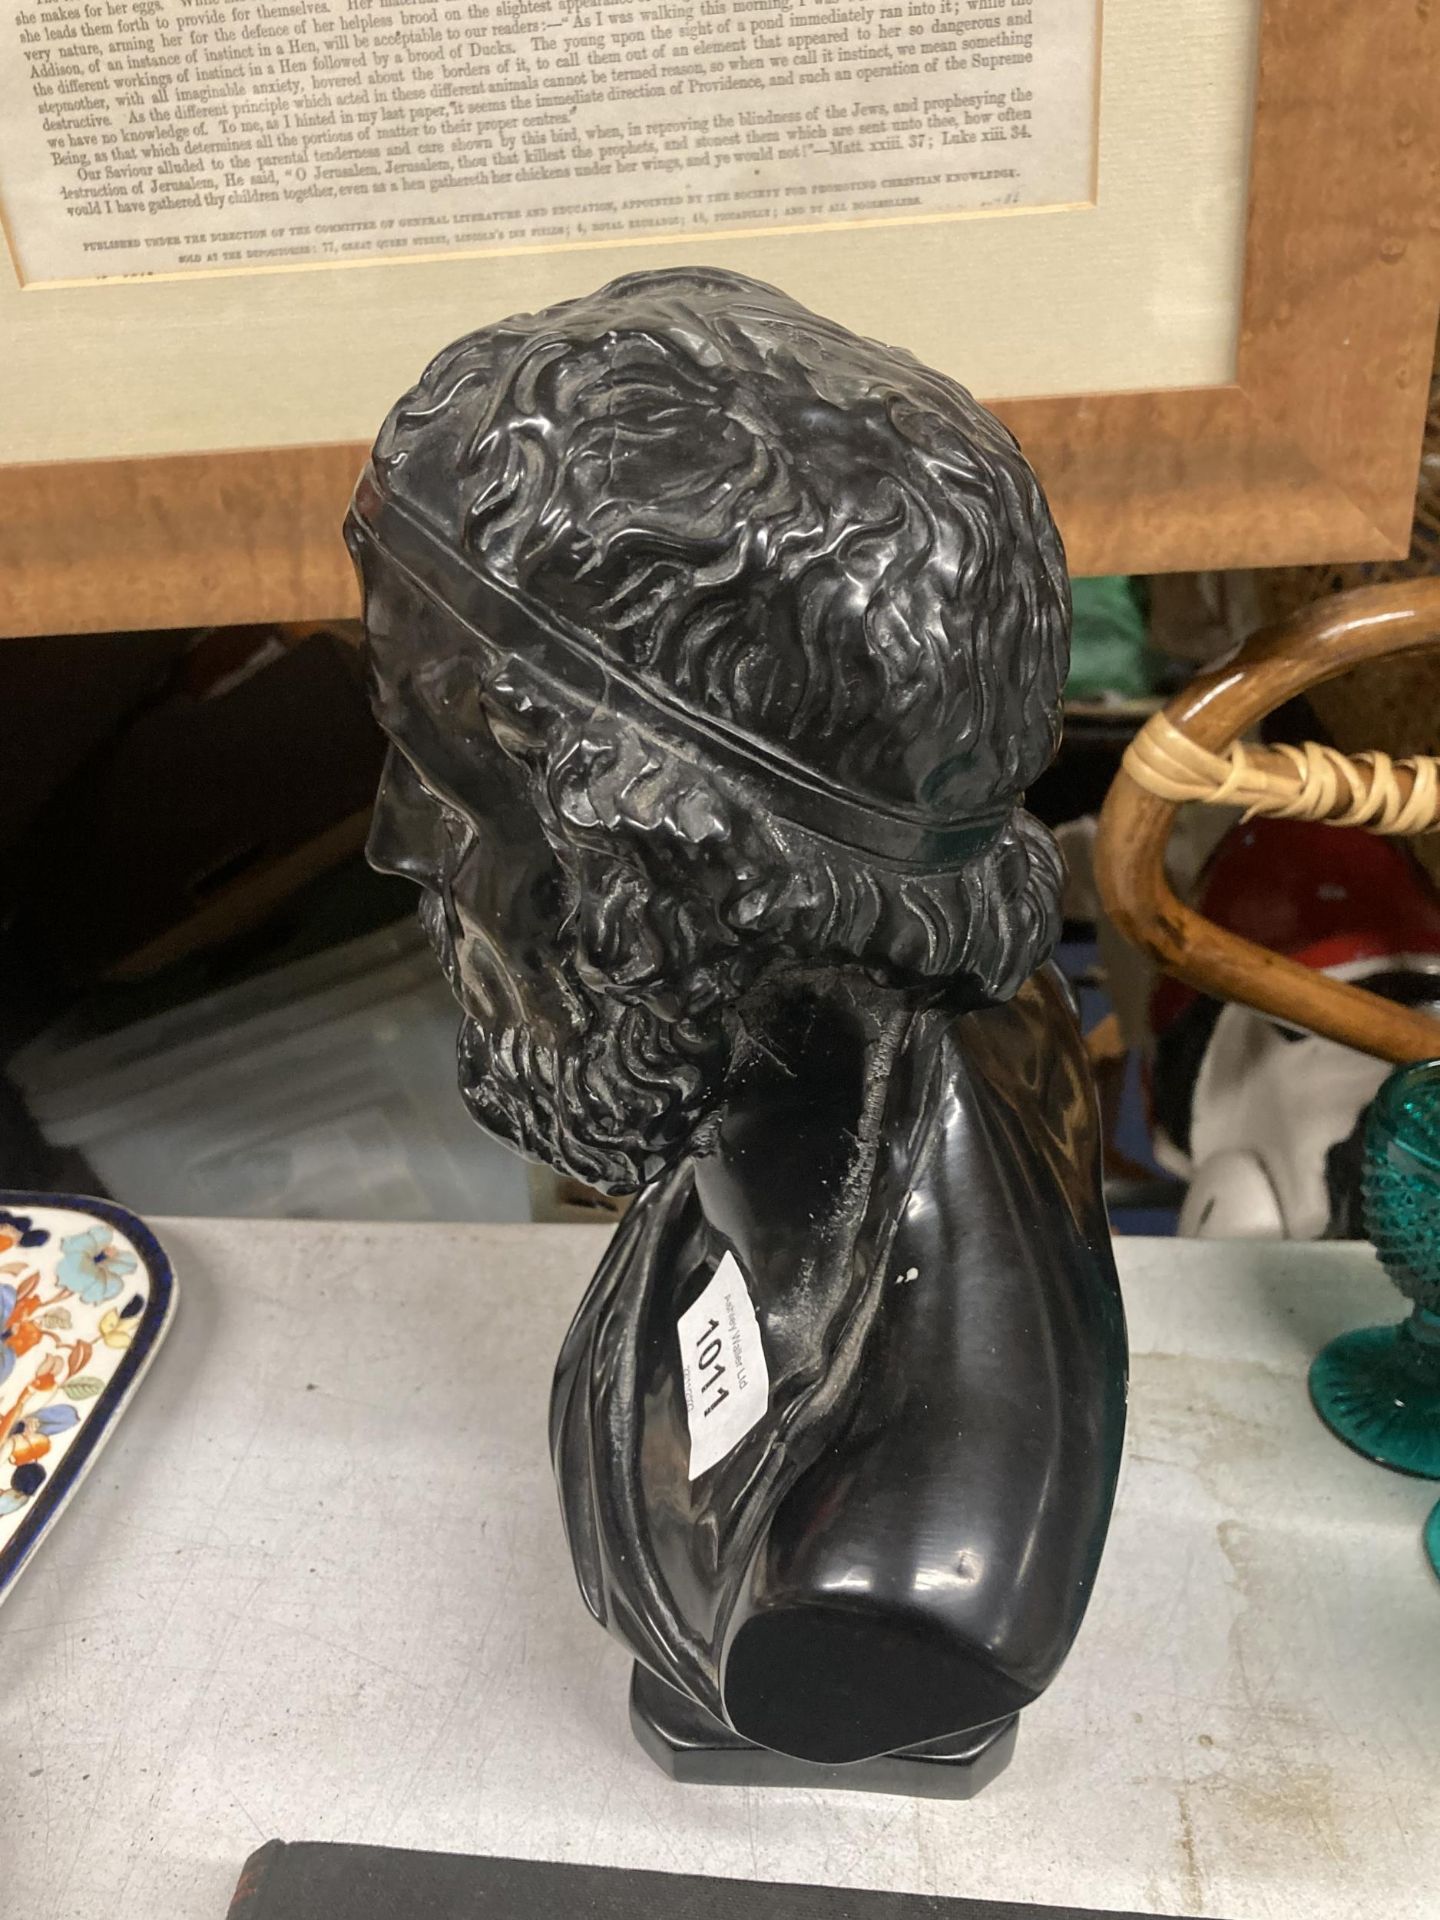 A HEAVY RESIN BUST OF CLASSICAL GREEK POET TITLED - 'HOMERE', HEIGHT 30 CM - Image 2 of 2